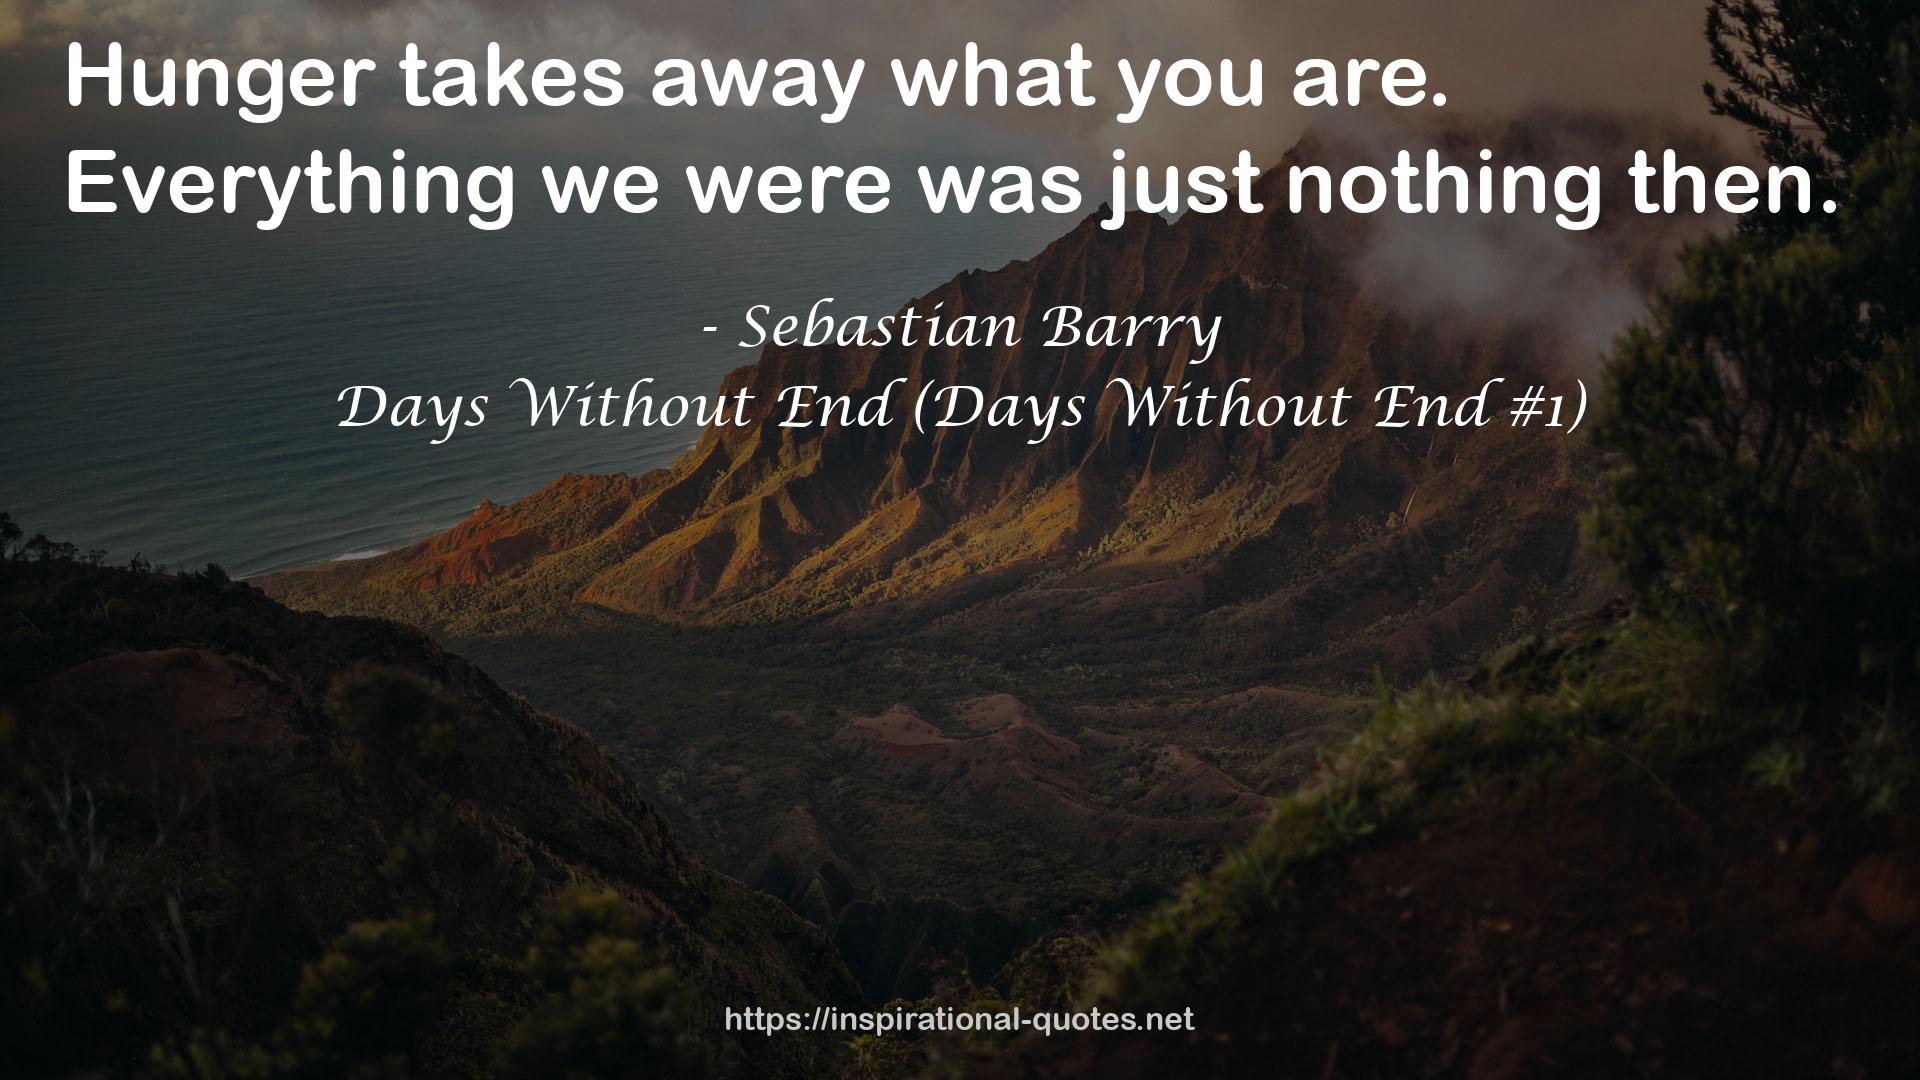 Days Without End (Days Without End #1) QUOTES